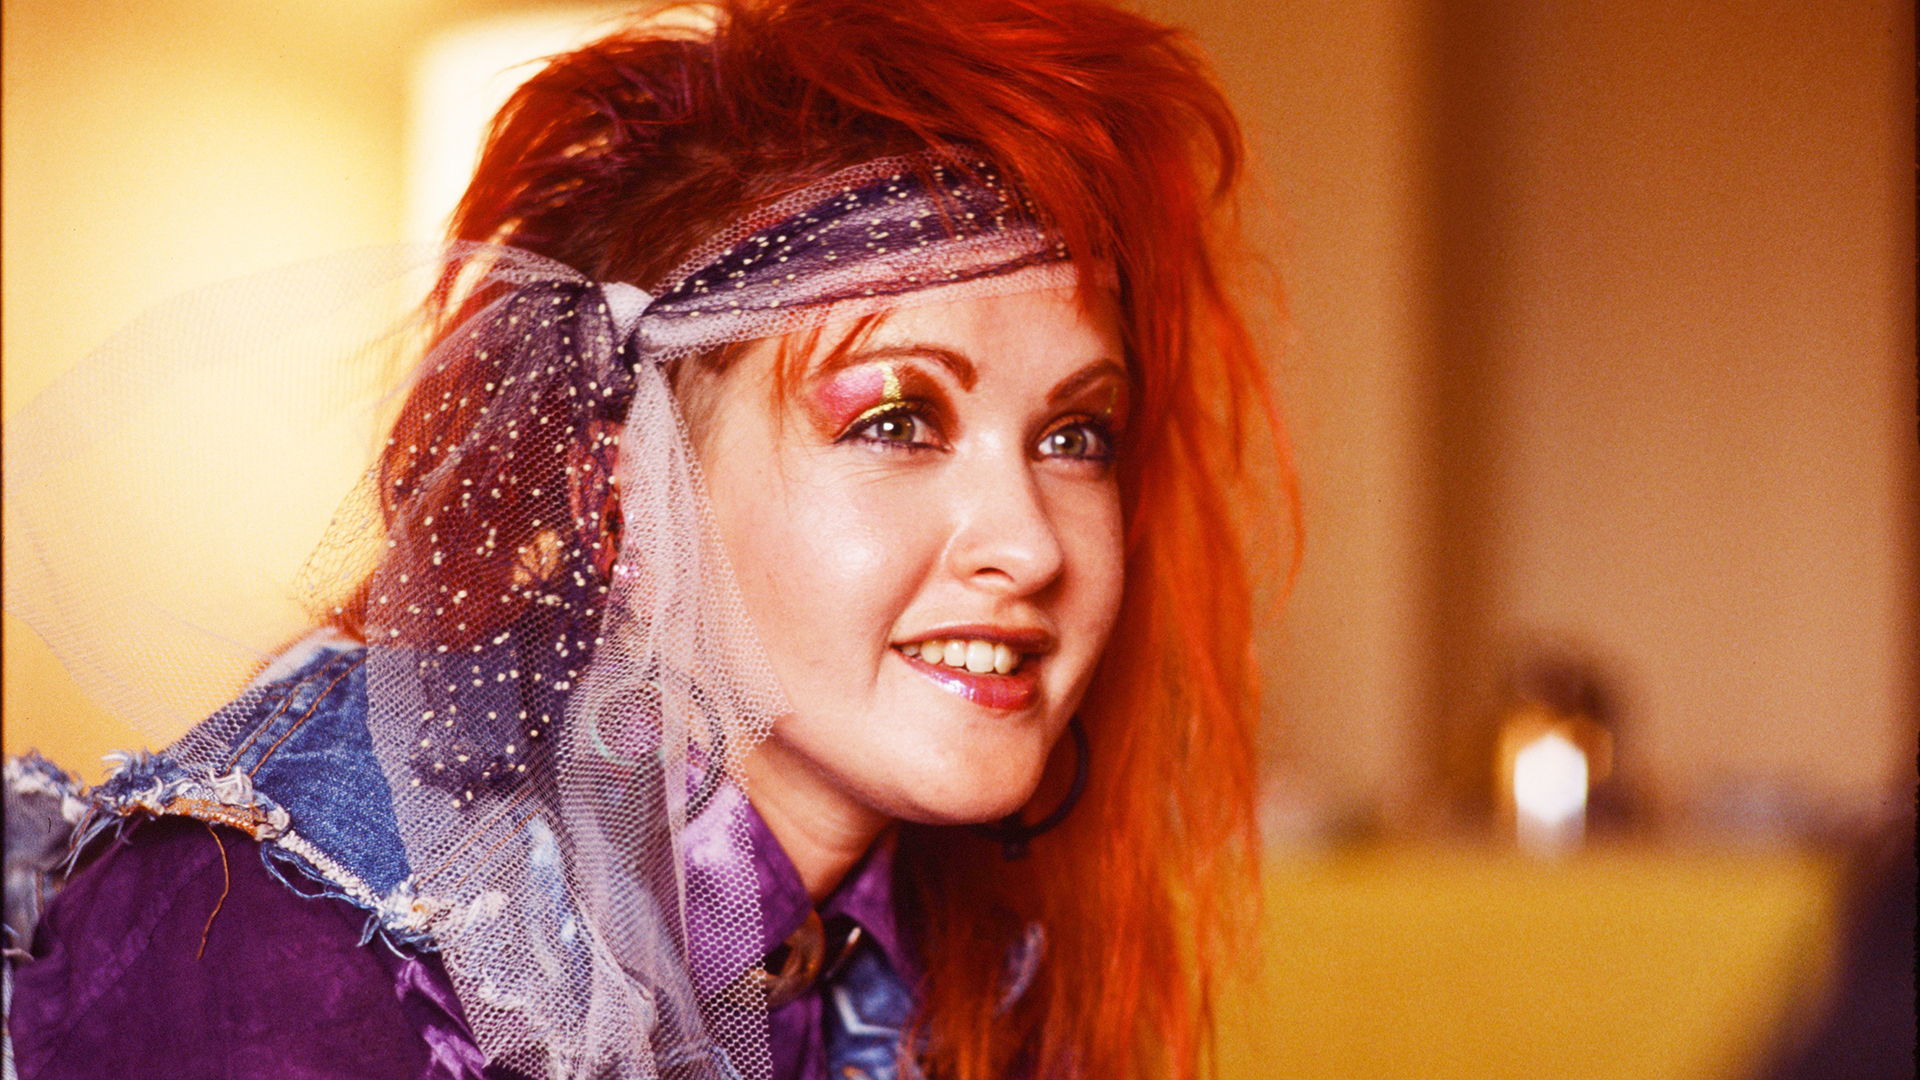 June 9, 1984: “Time After Time” by Cyndi Lauper Hit No. 1 on the Billboard Hot 100